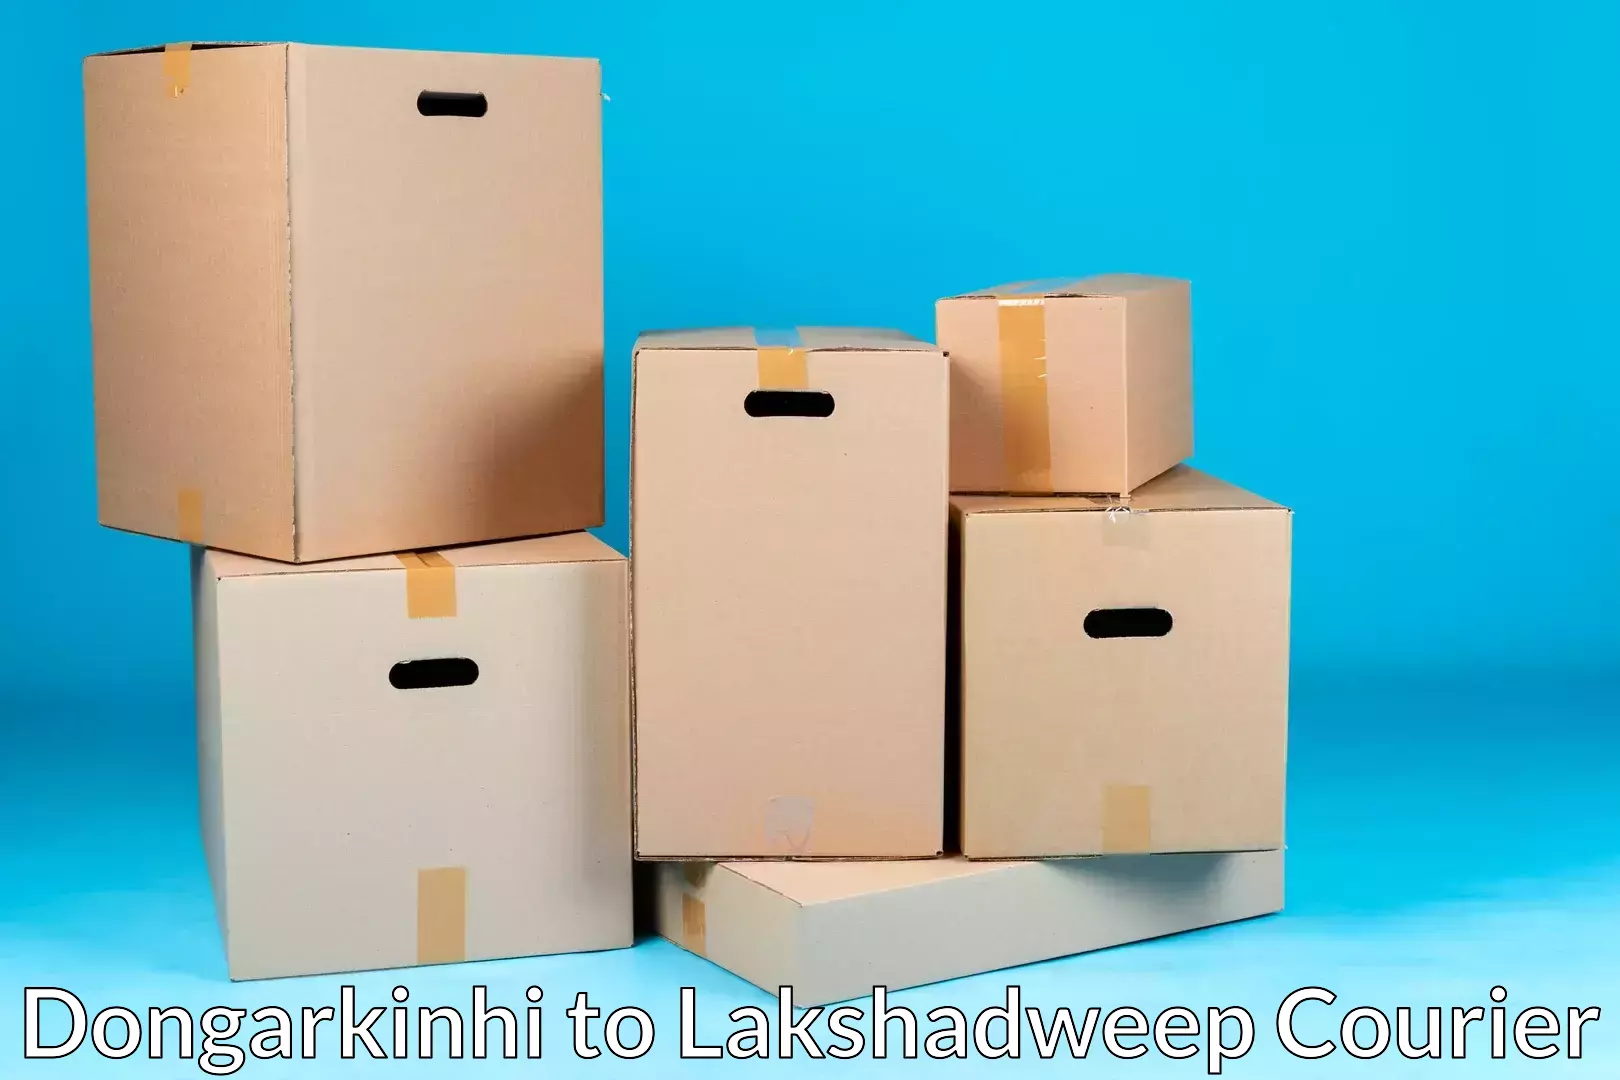 Professional relocation services Dongarkinhi to Lakshadweep